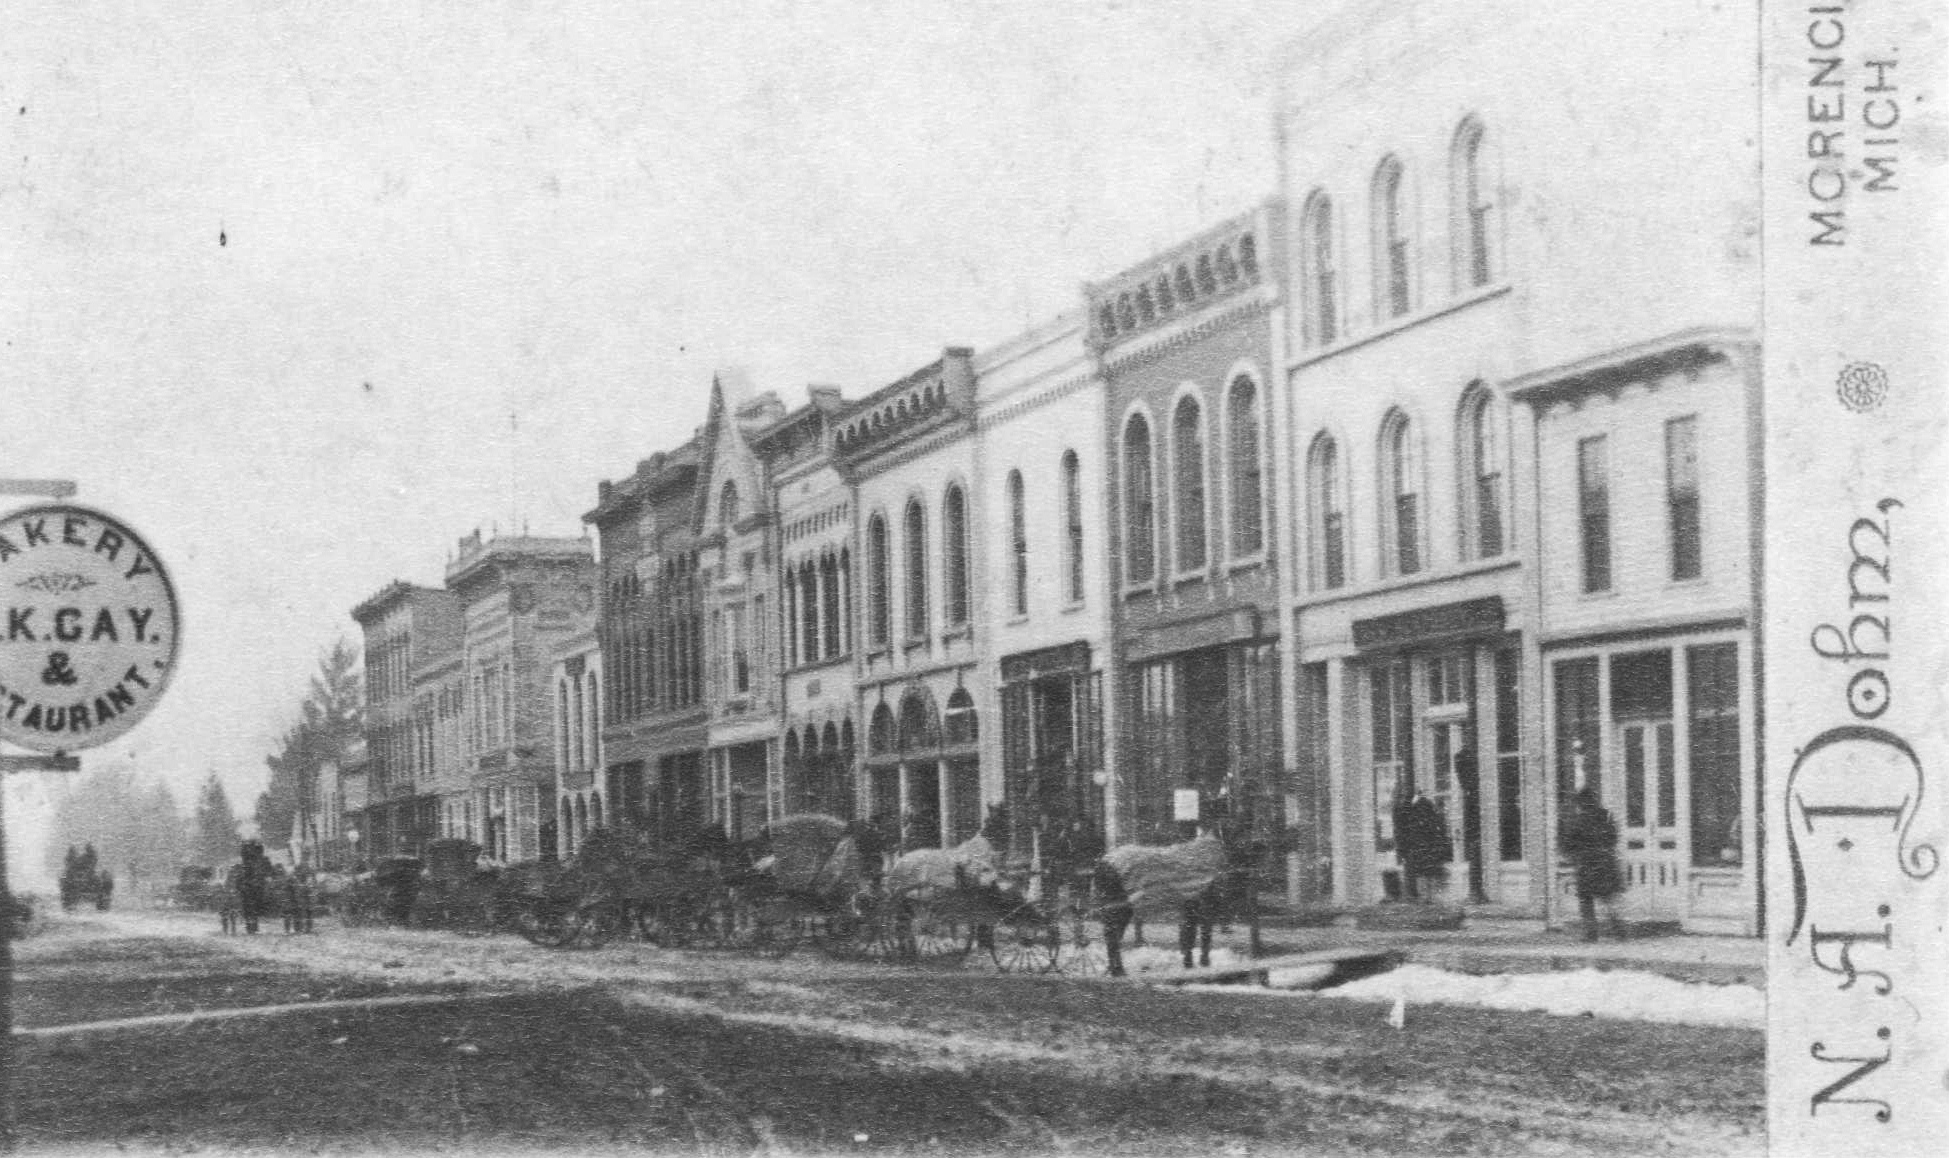 West Main Street, Morenci, Michigan (south side), looking east from L.K. Gay’s bakery.  Prior to 1911 and after 1902.